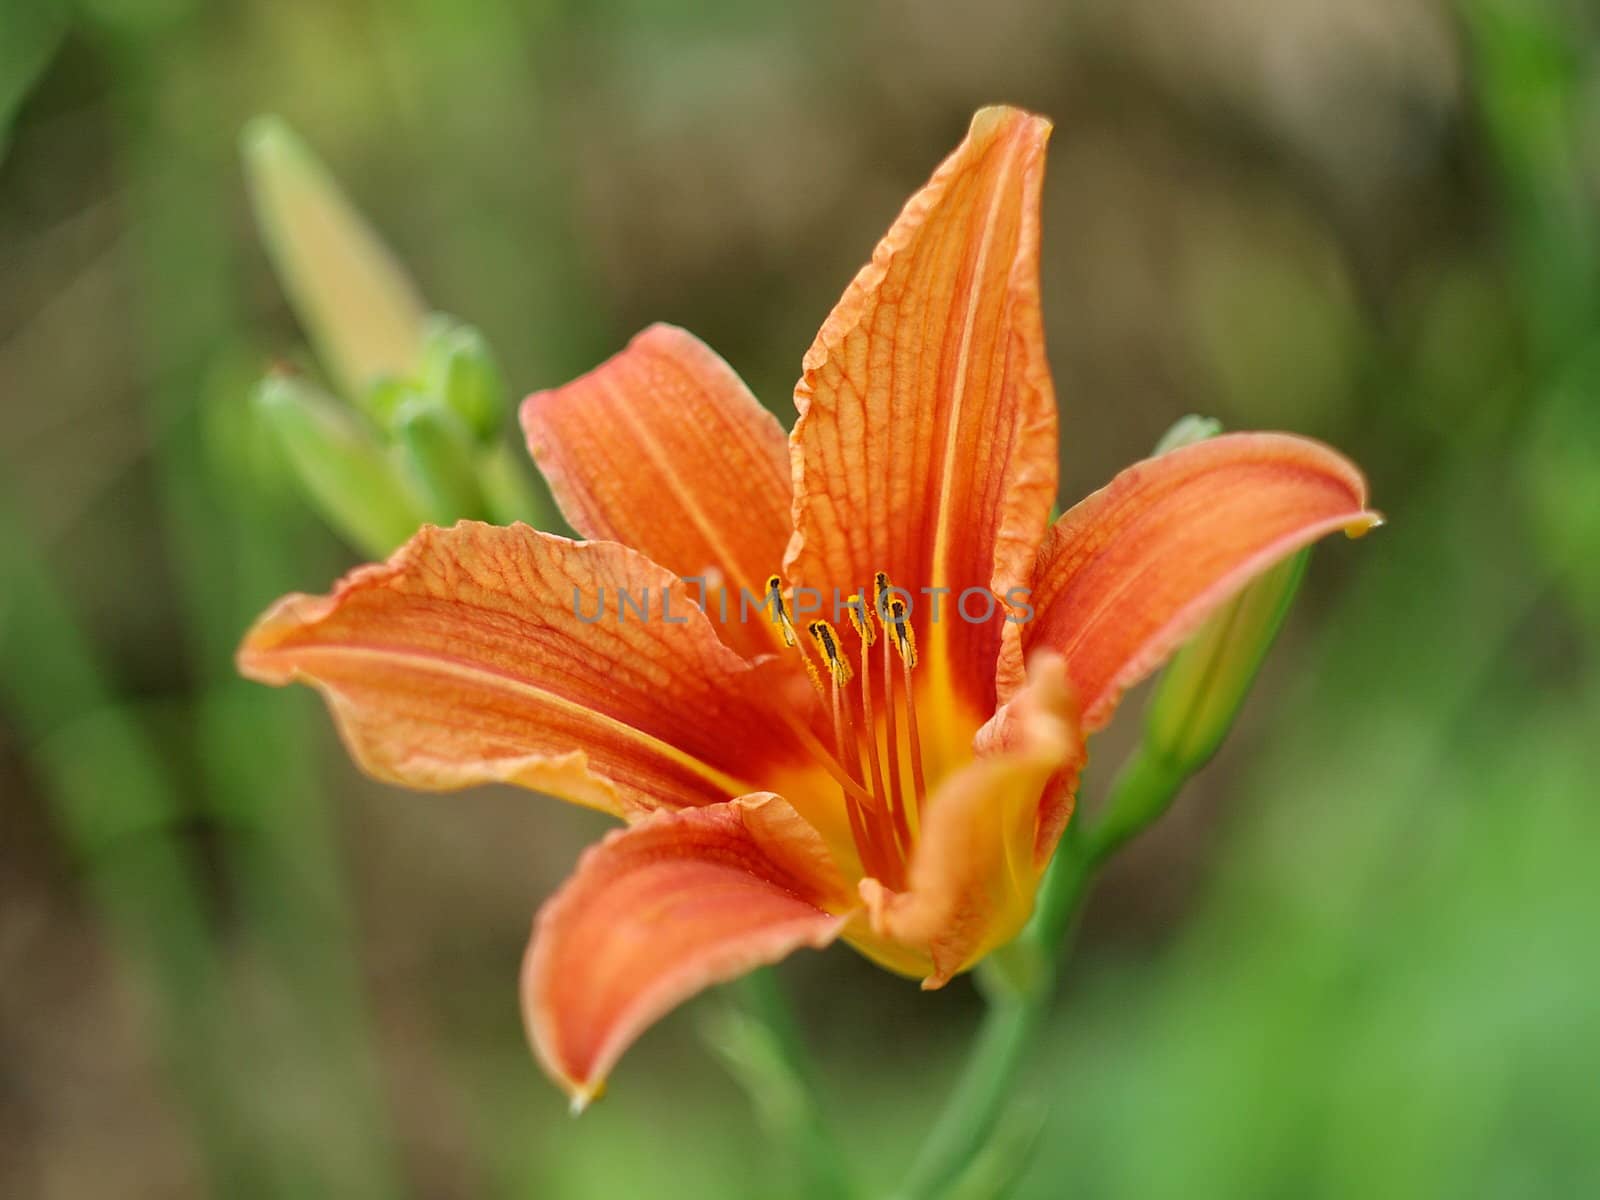 Orange lily by anderm